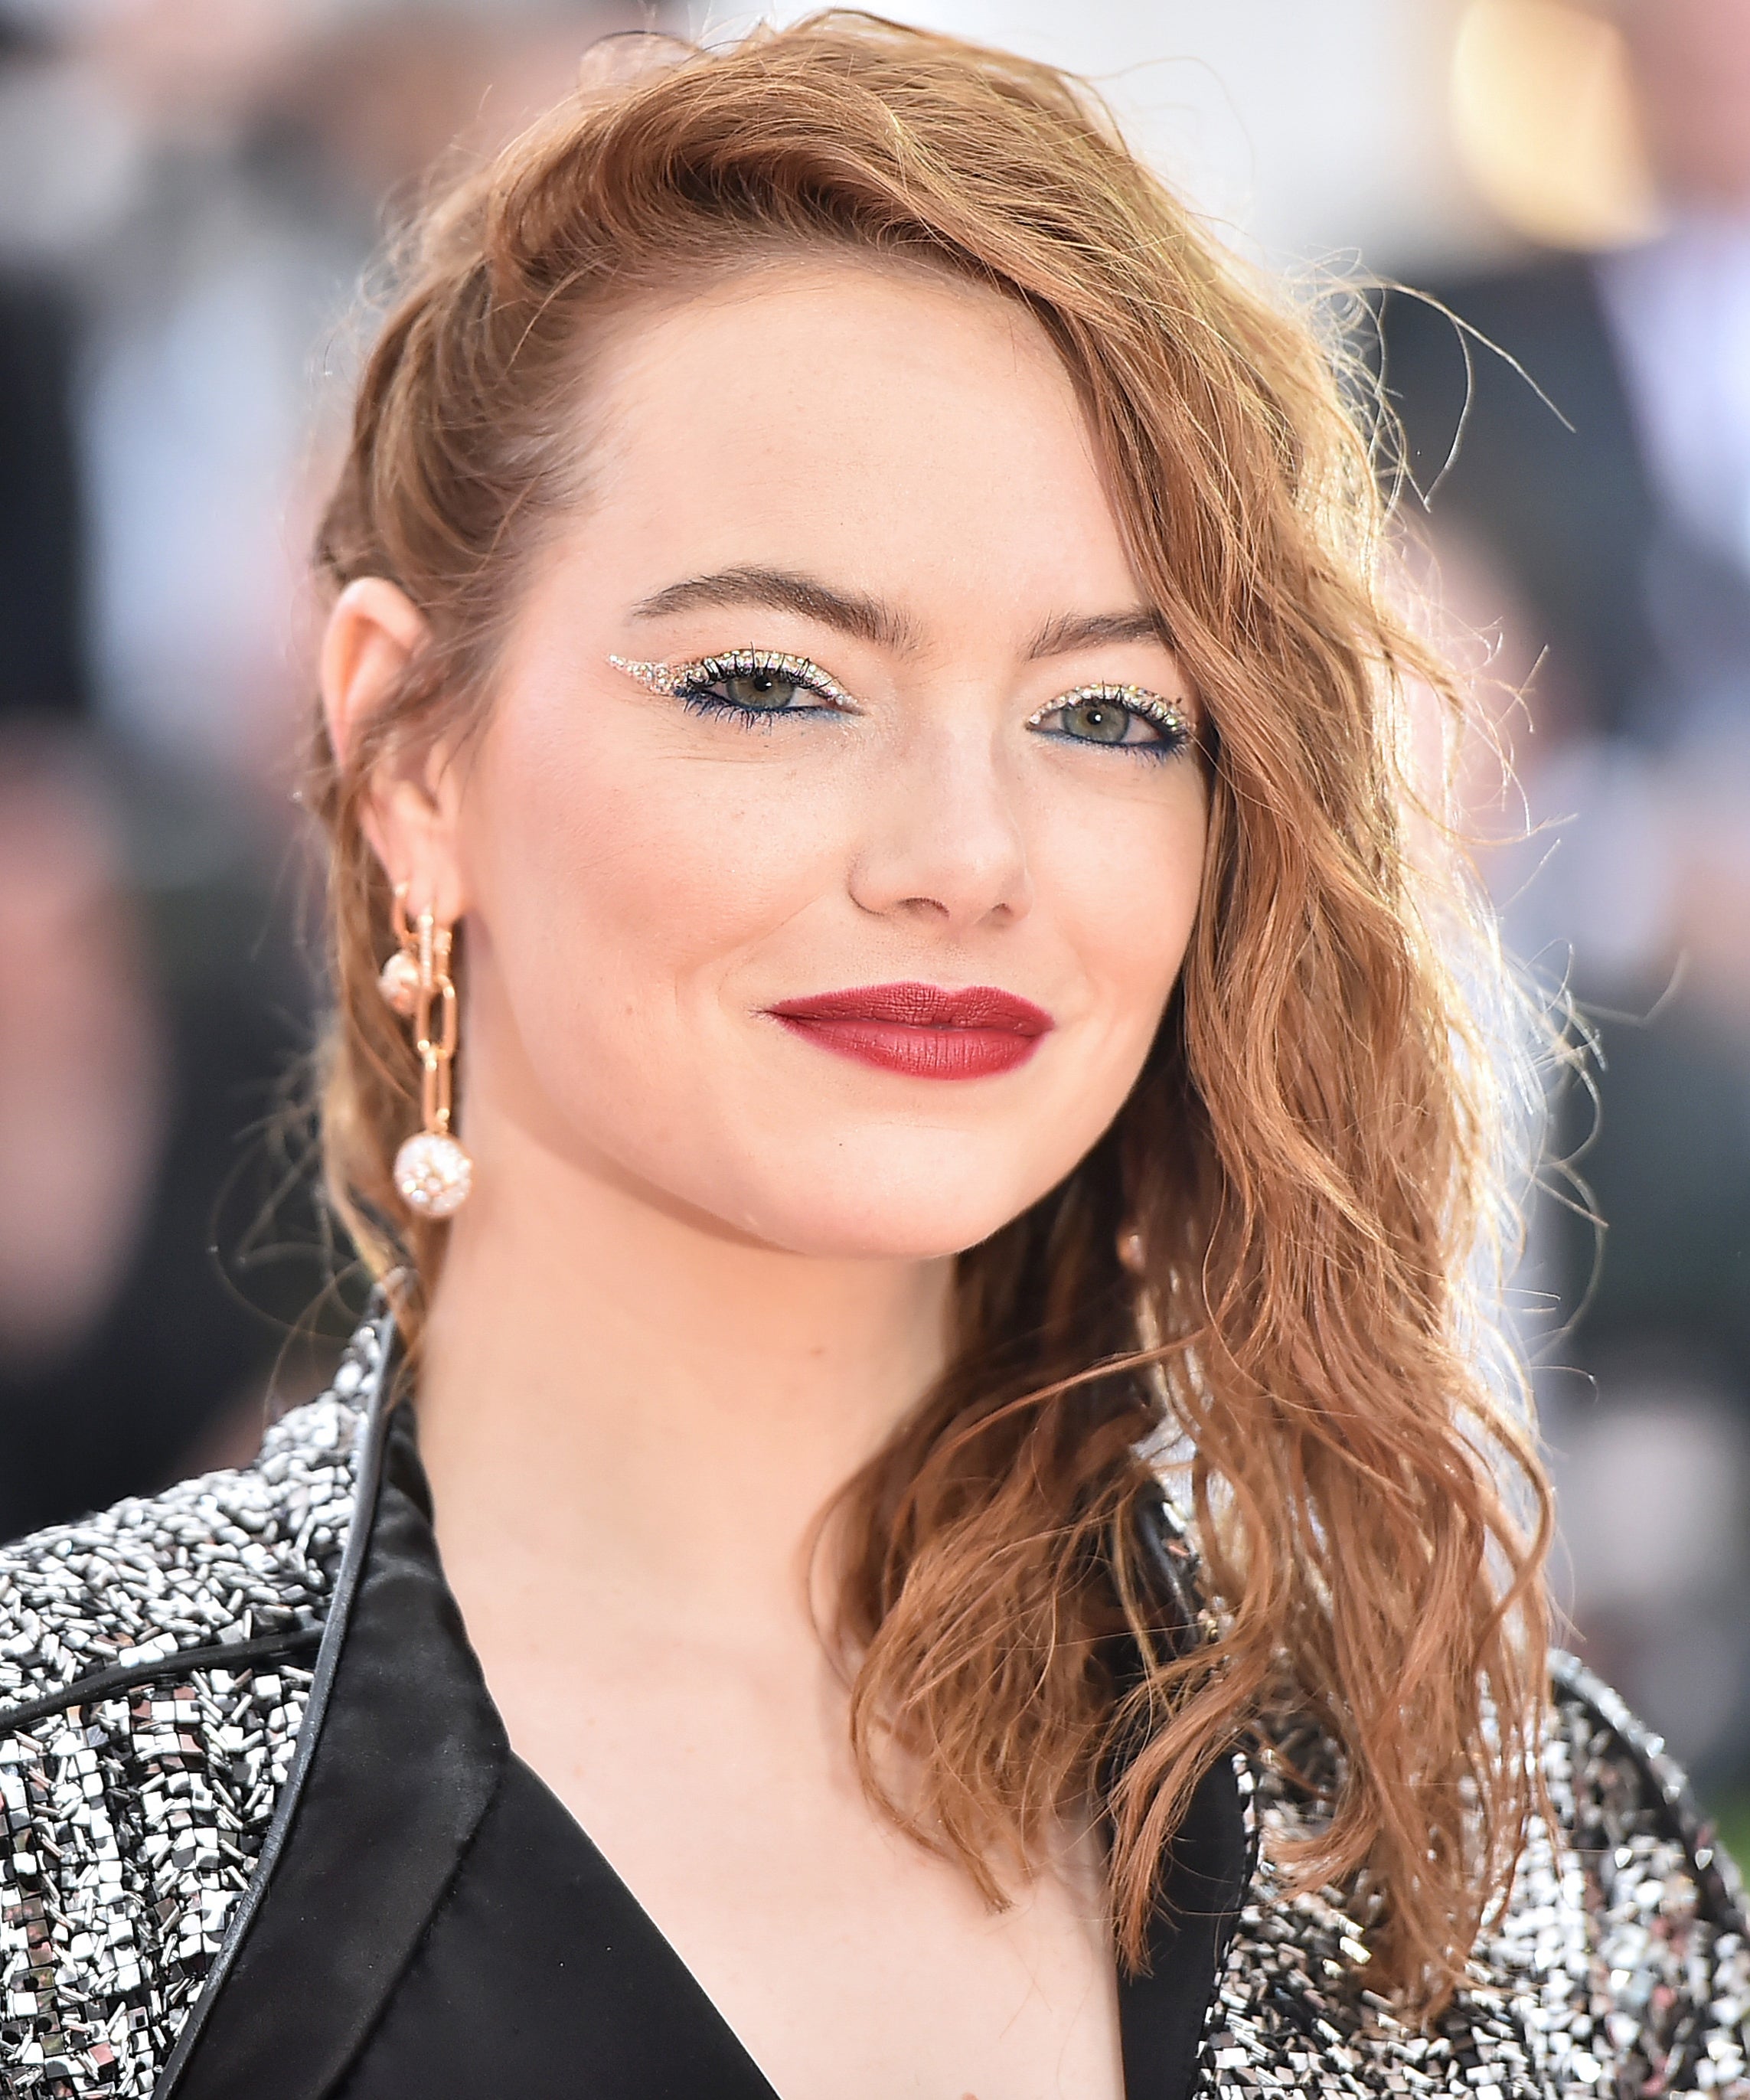 The special meaning behind Emma Stone's baby's name [VIDEO]